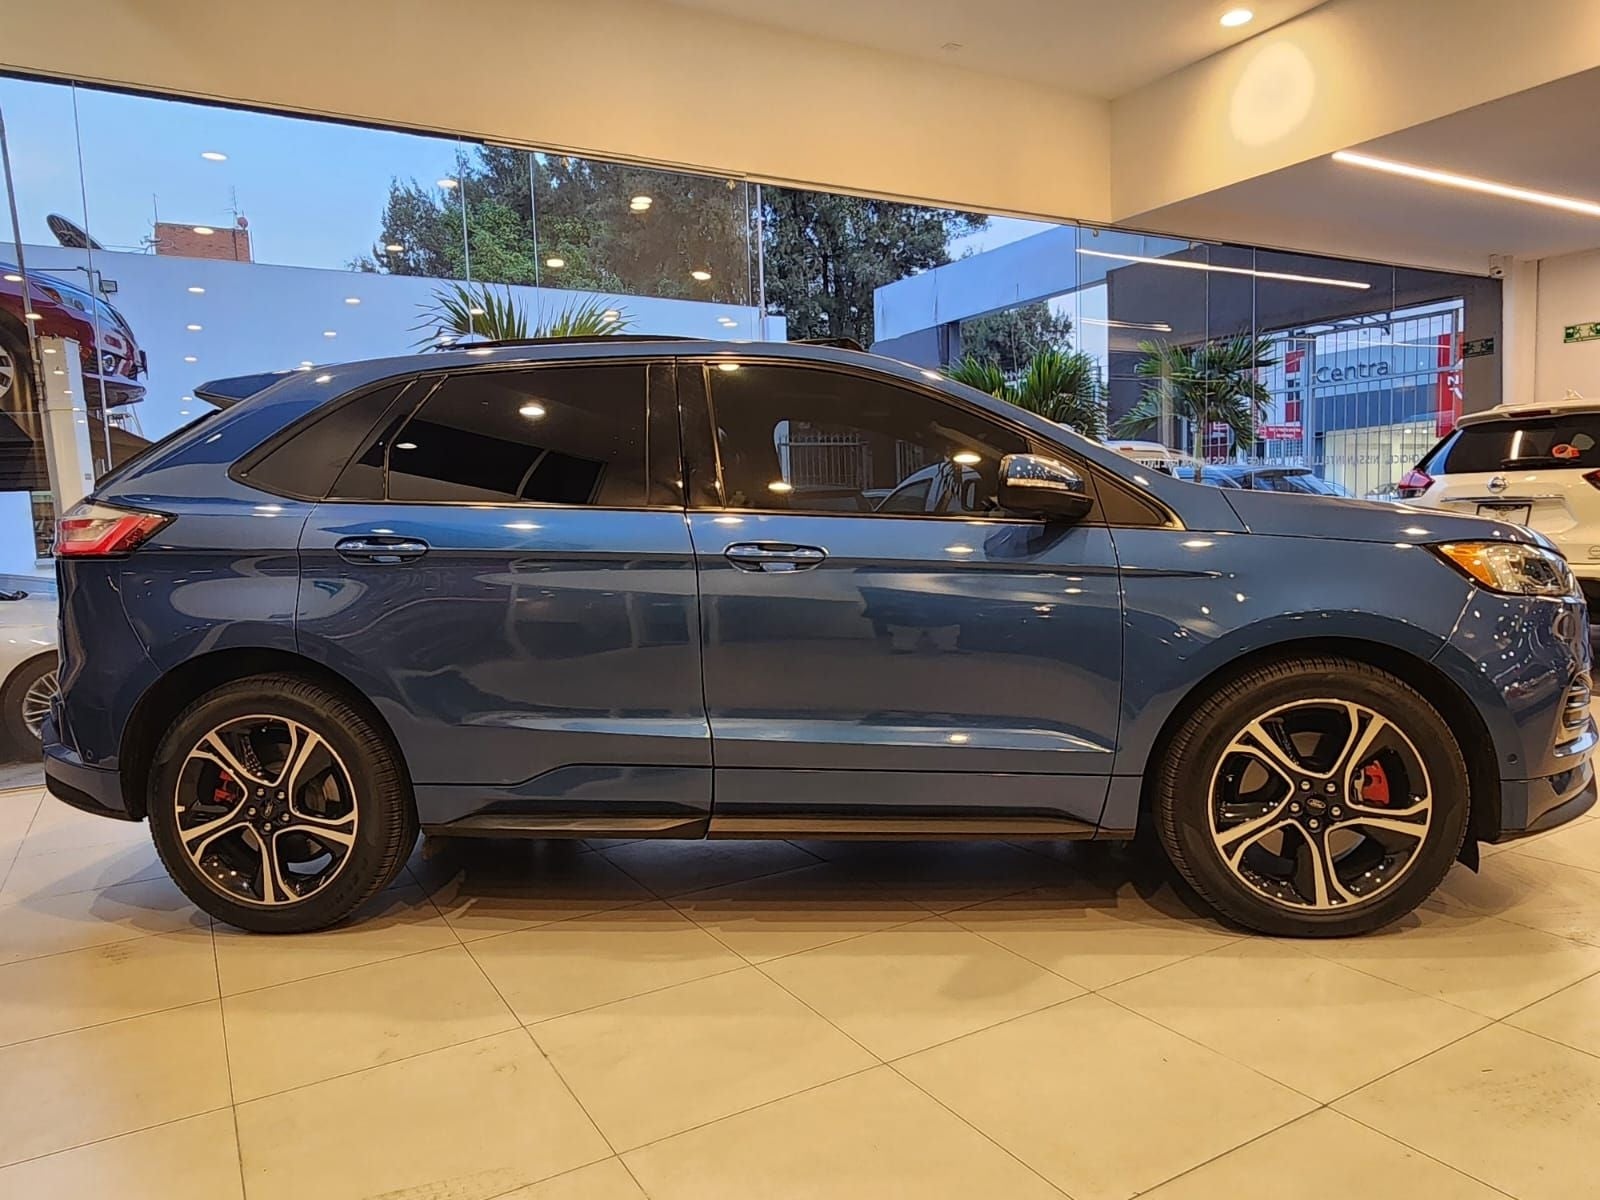 2019 Ford Edge 2.7 ST Ecoboost At